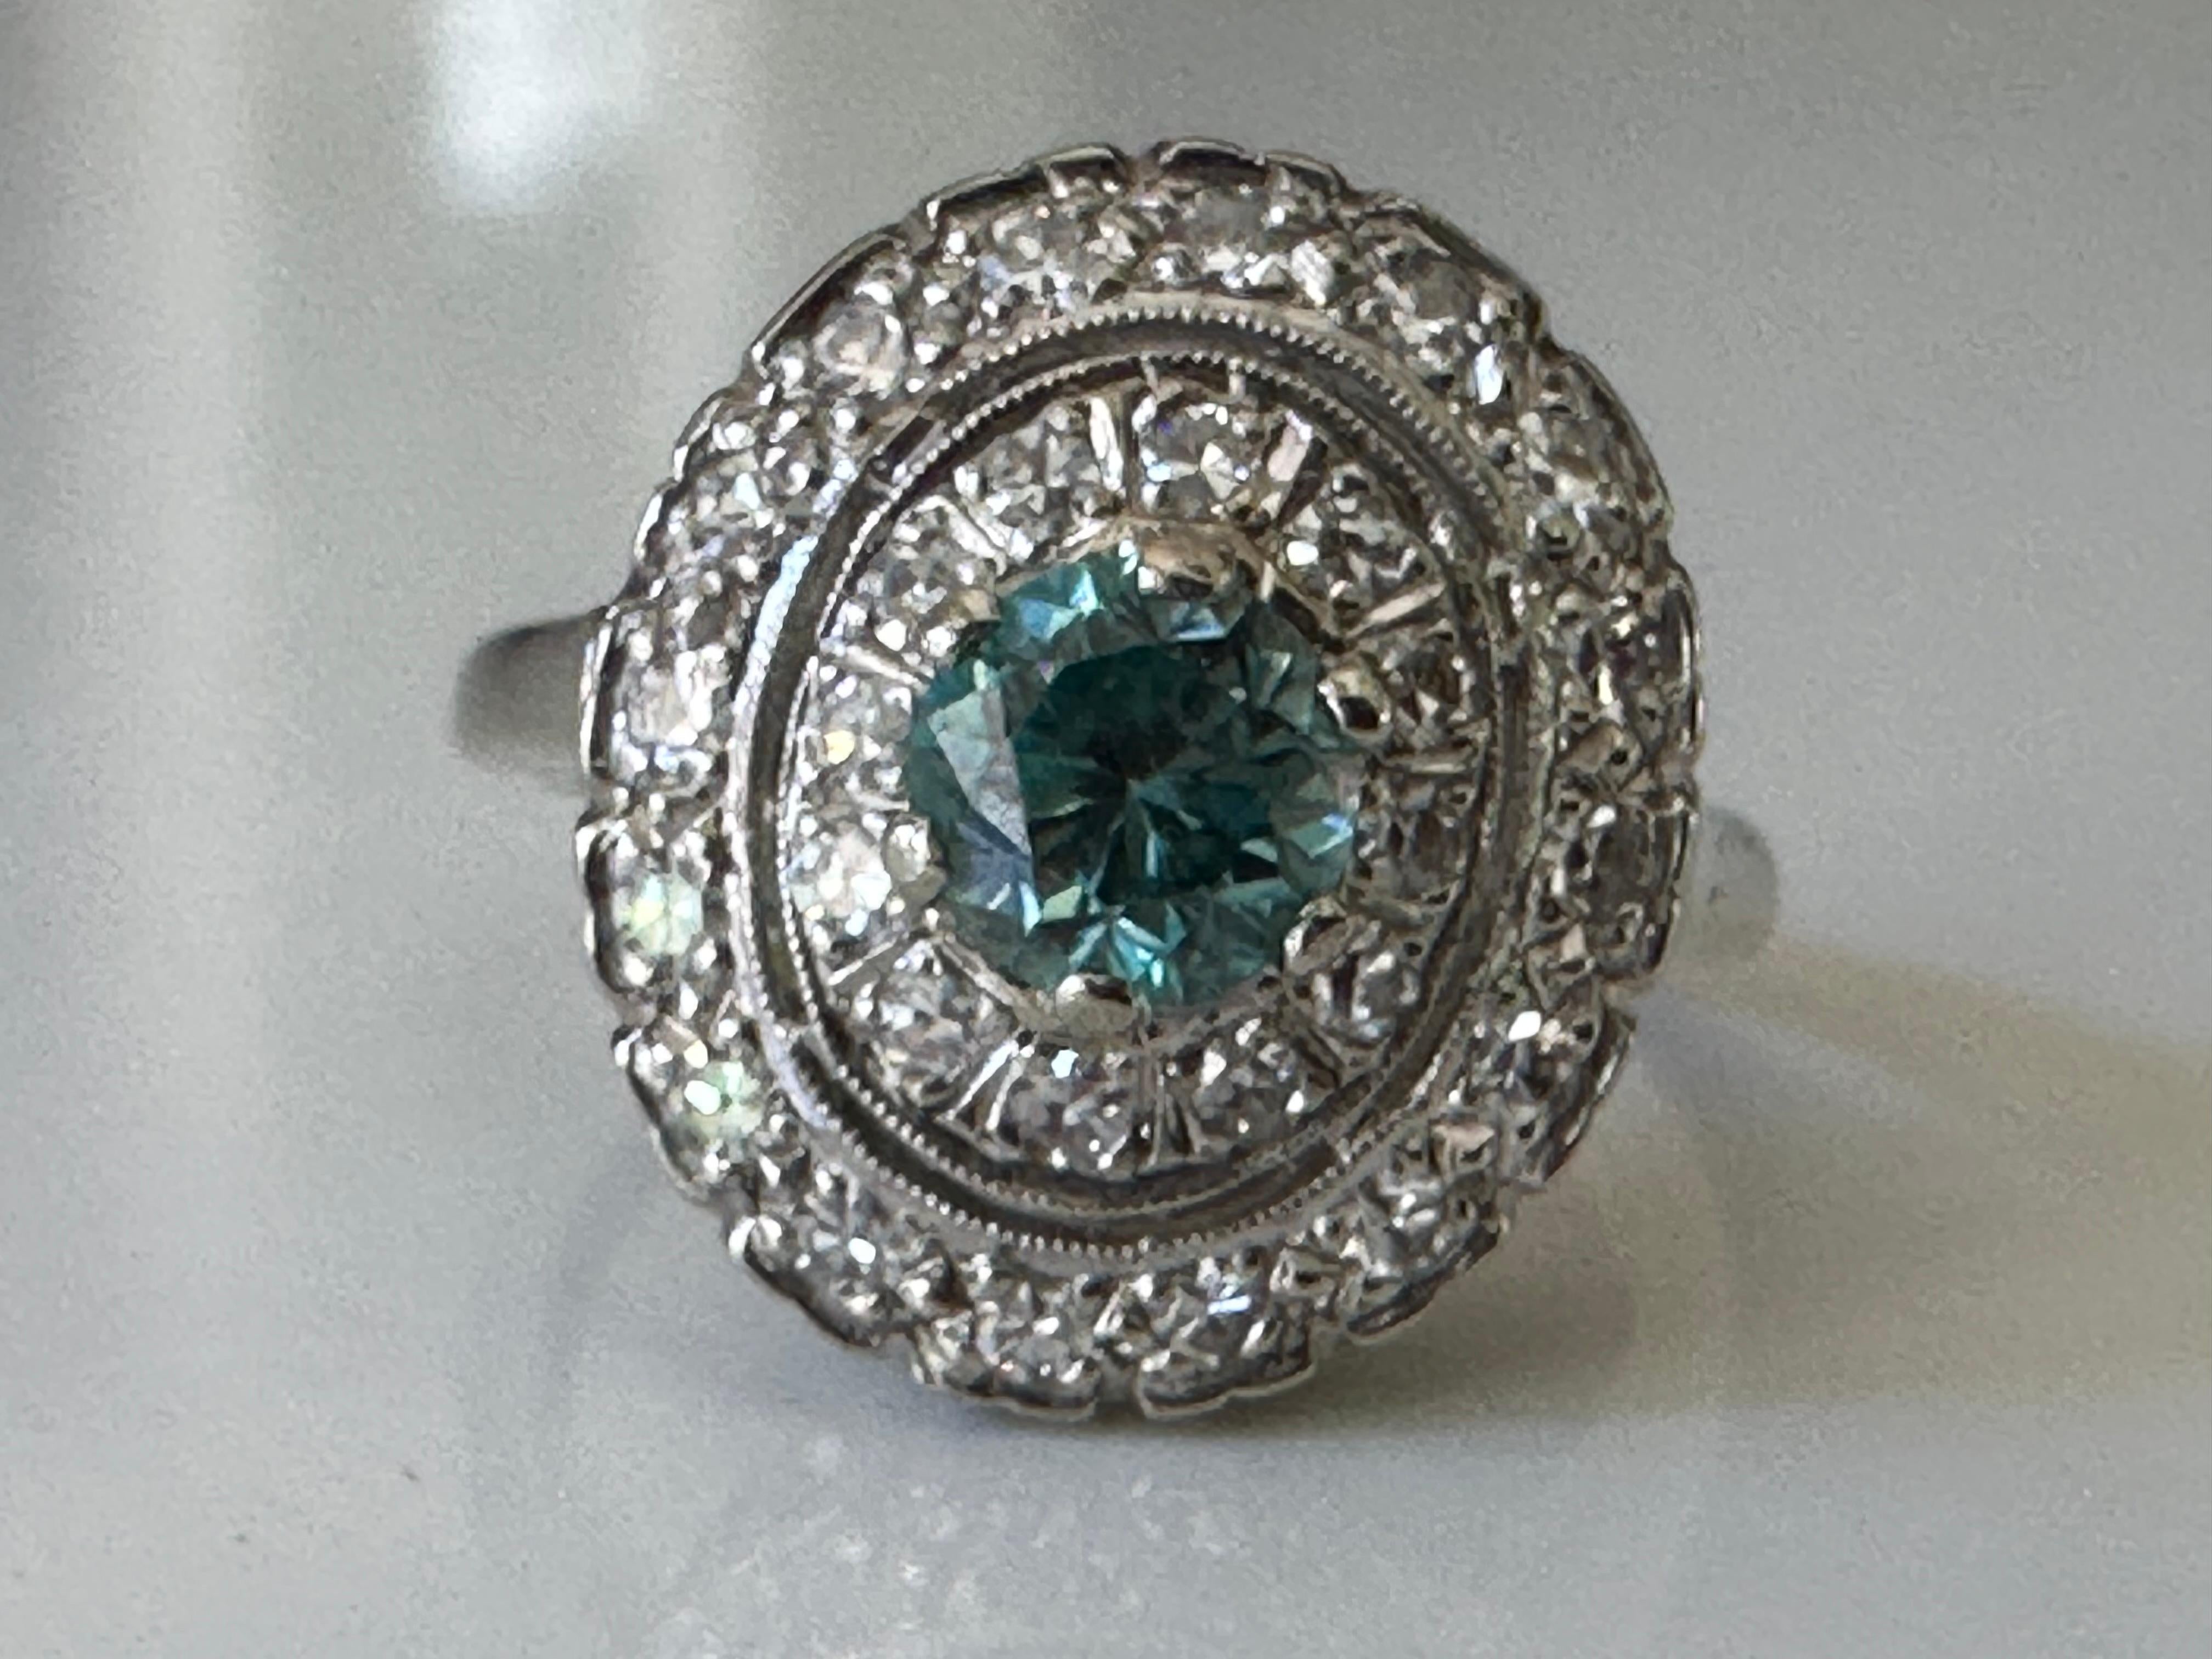 Crafted in the 1950s, this mid-century ring features an electric blue round-cut zircon measuring 5.2x5.1mm. The approximately 1.04-carat stone is encircled by a double halo of twenty-eight  sparkling single cut diamonds measuring approximately 0.80